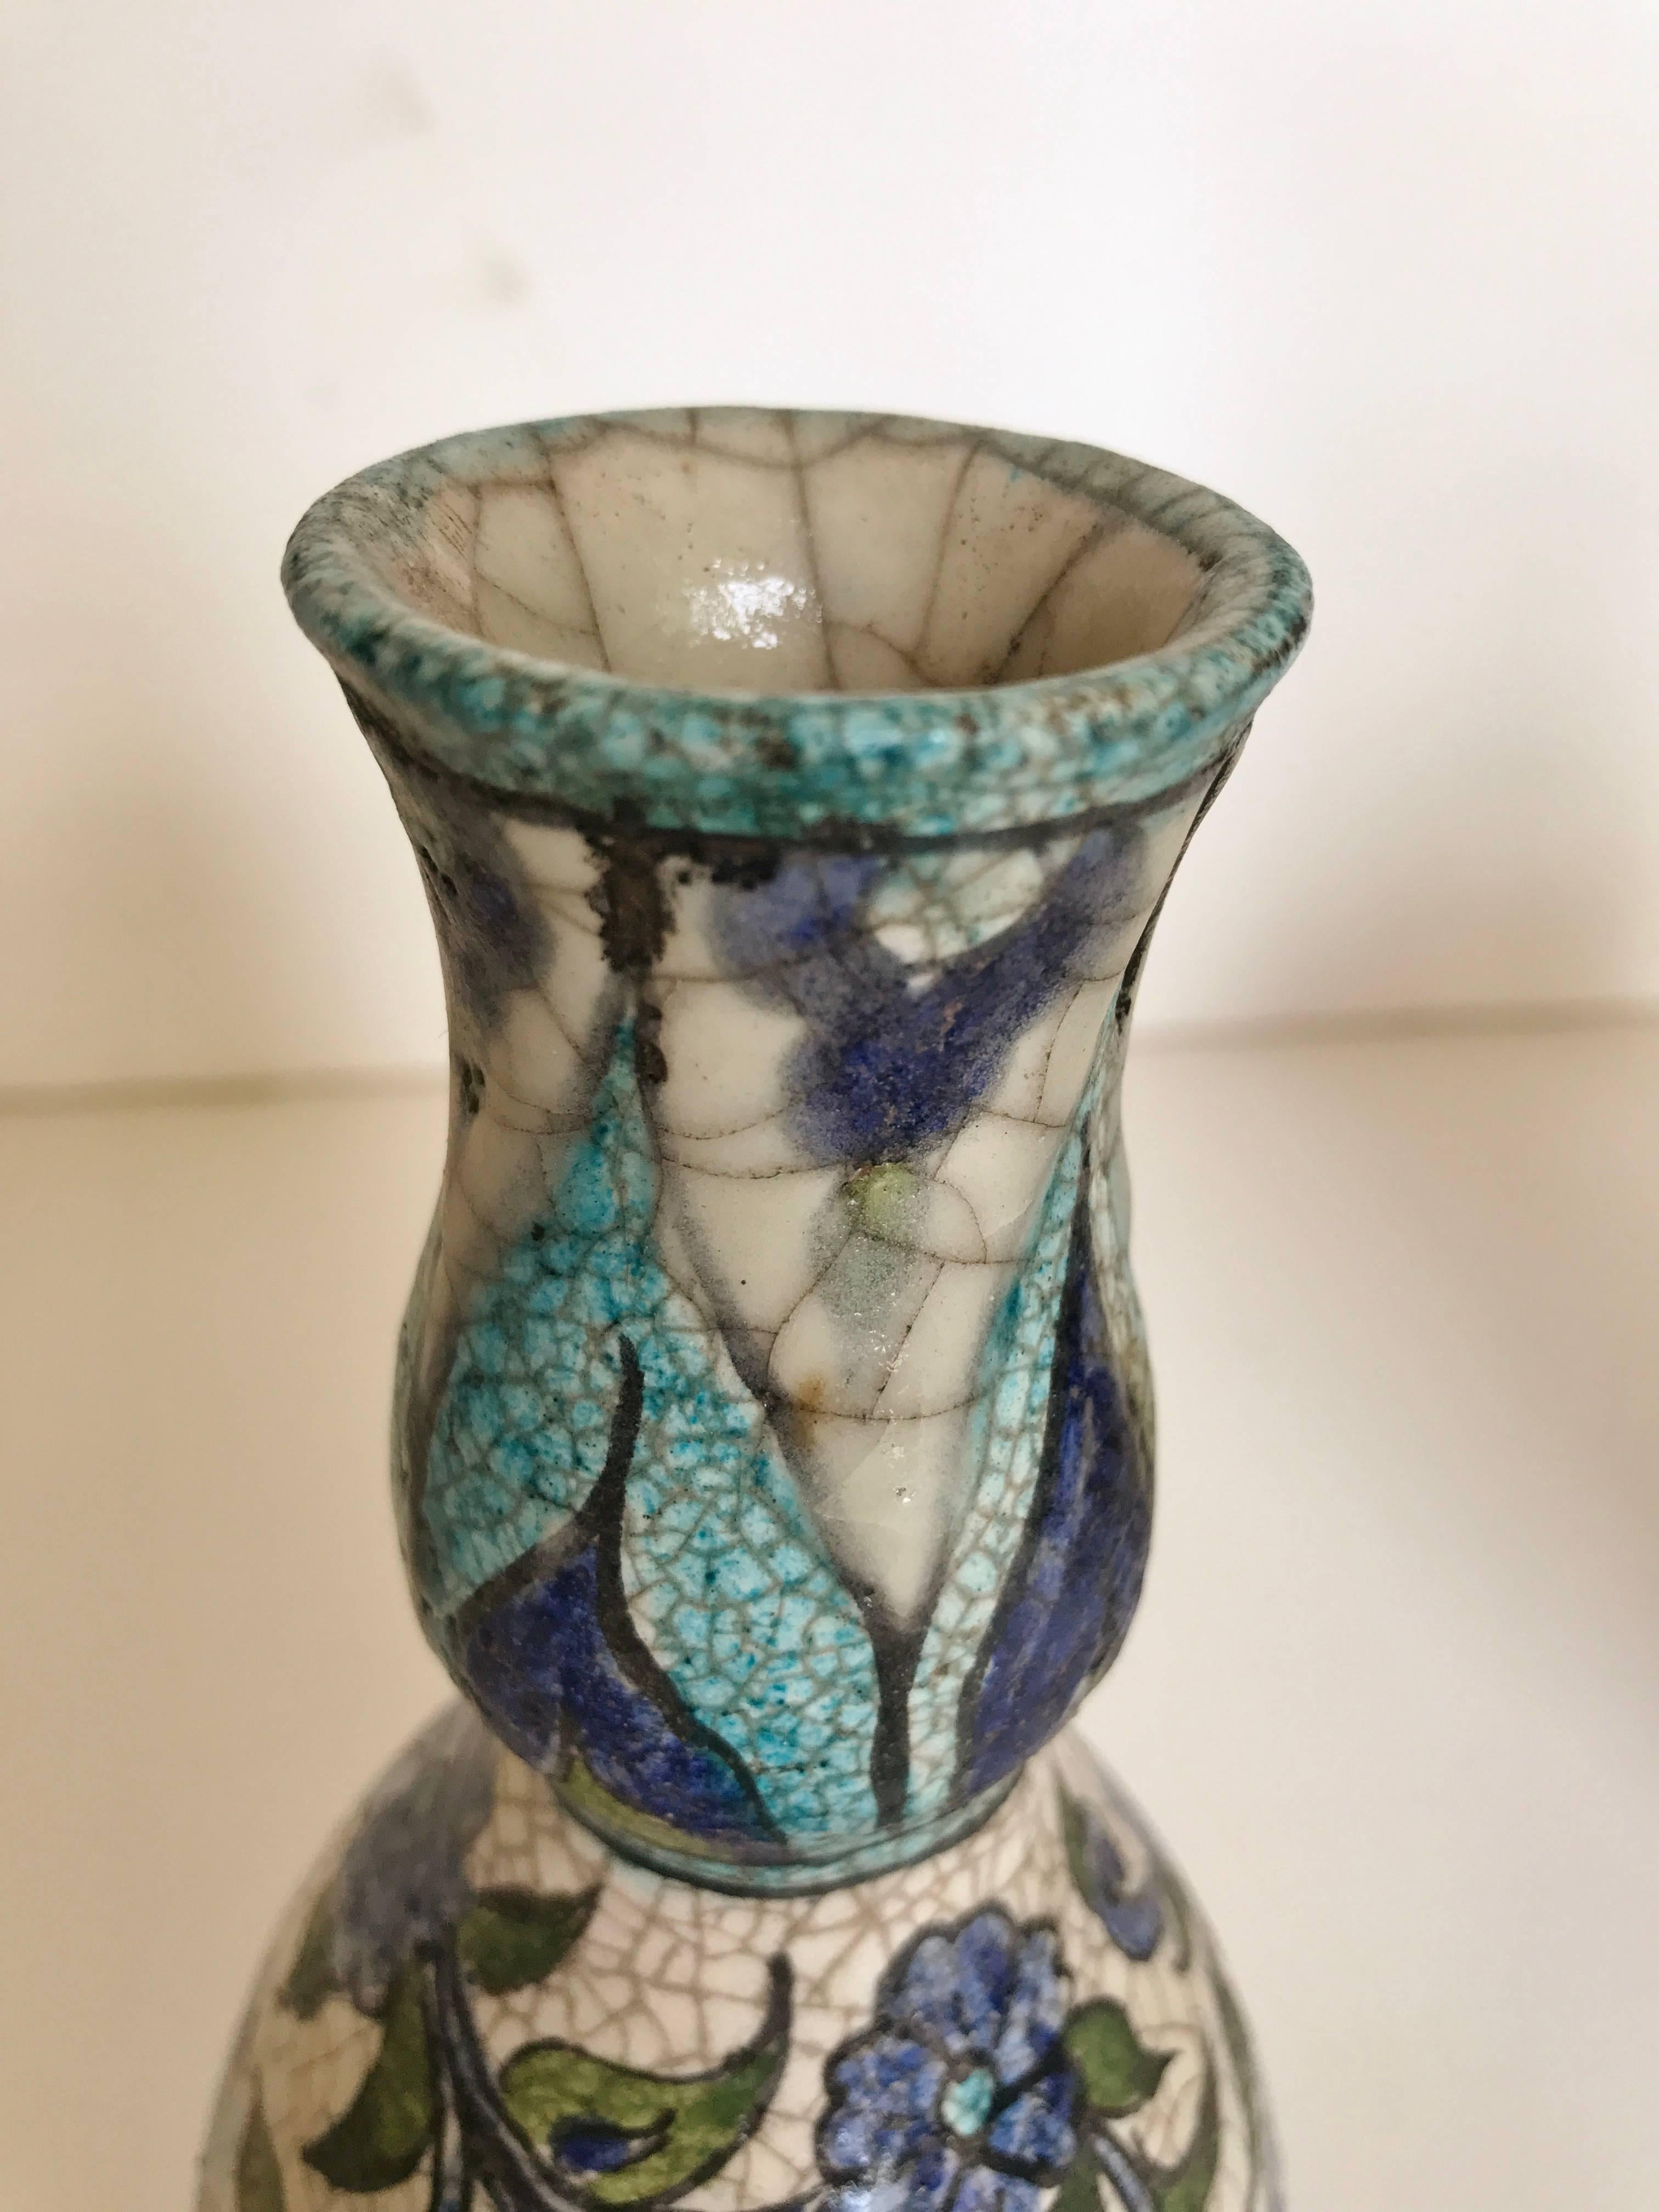 Pottery Two Vintage Syrian Vases with Traditional Blue and White Hand-Painted Designs